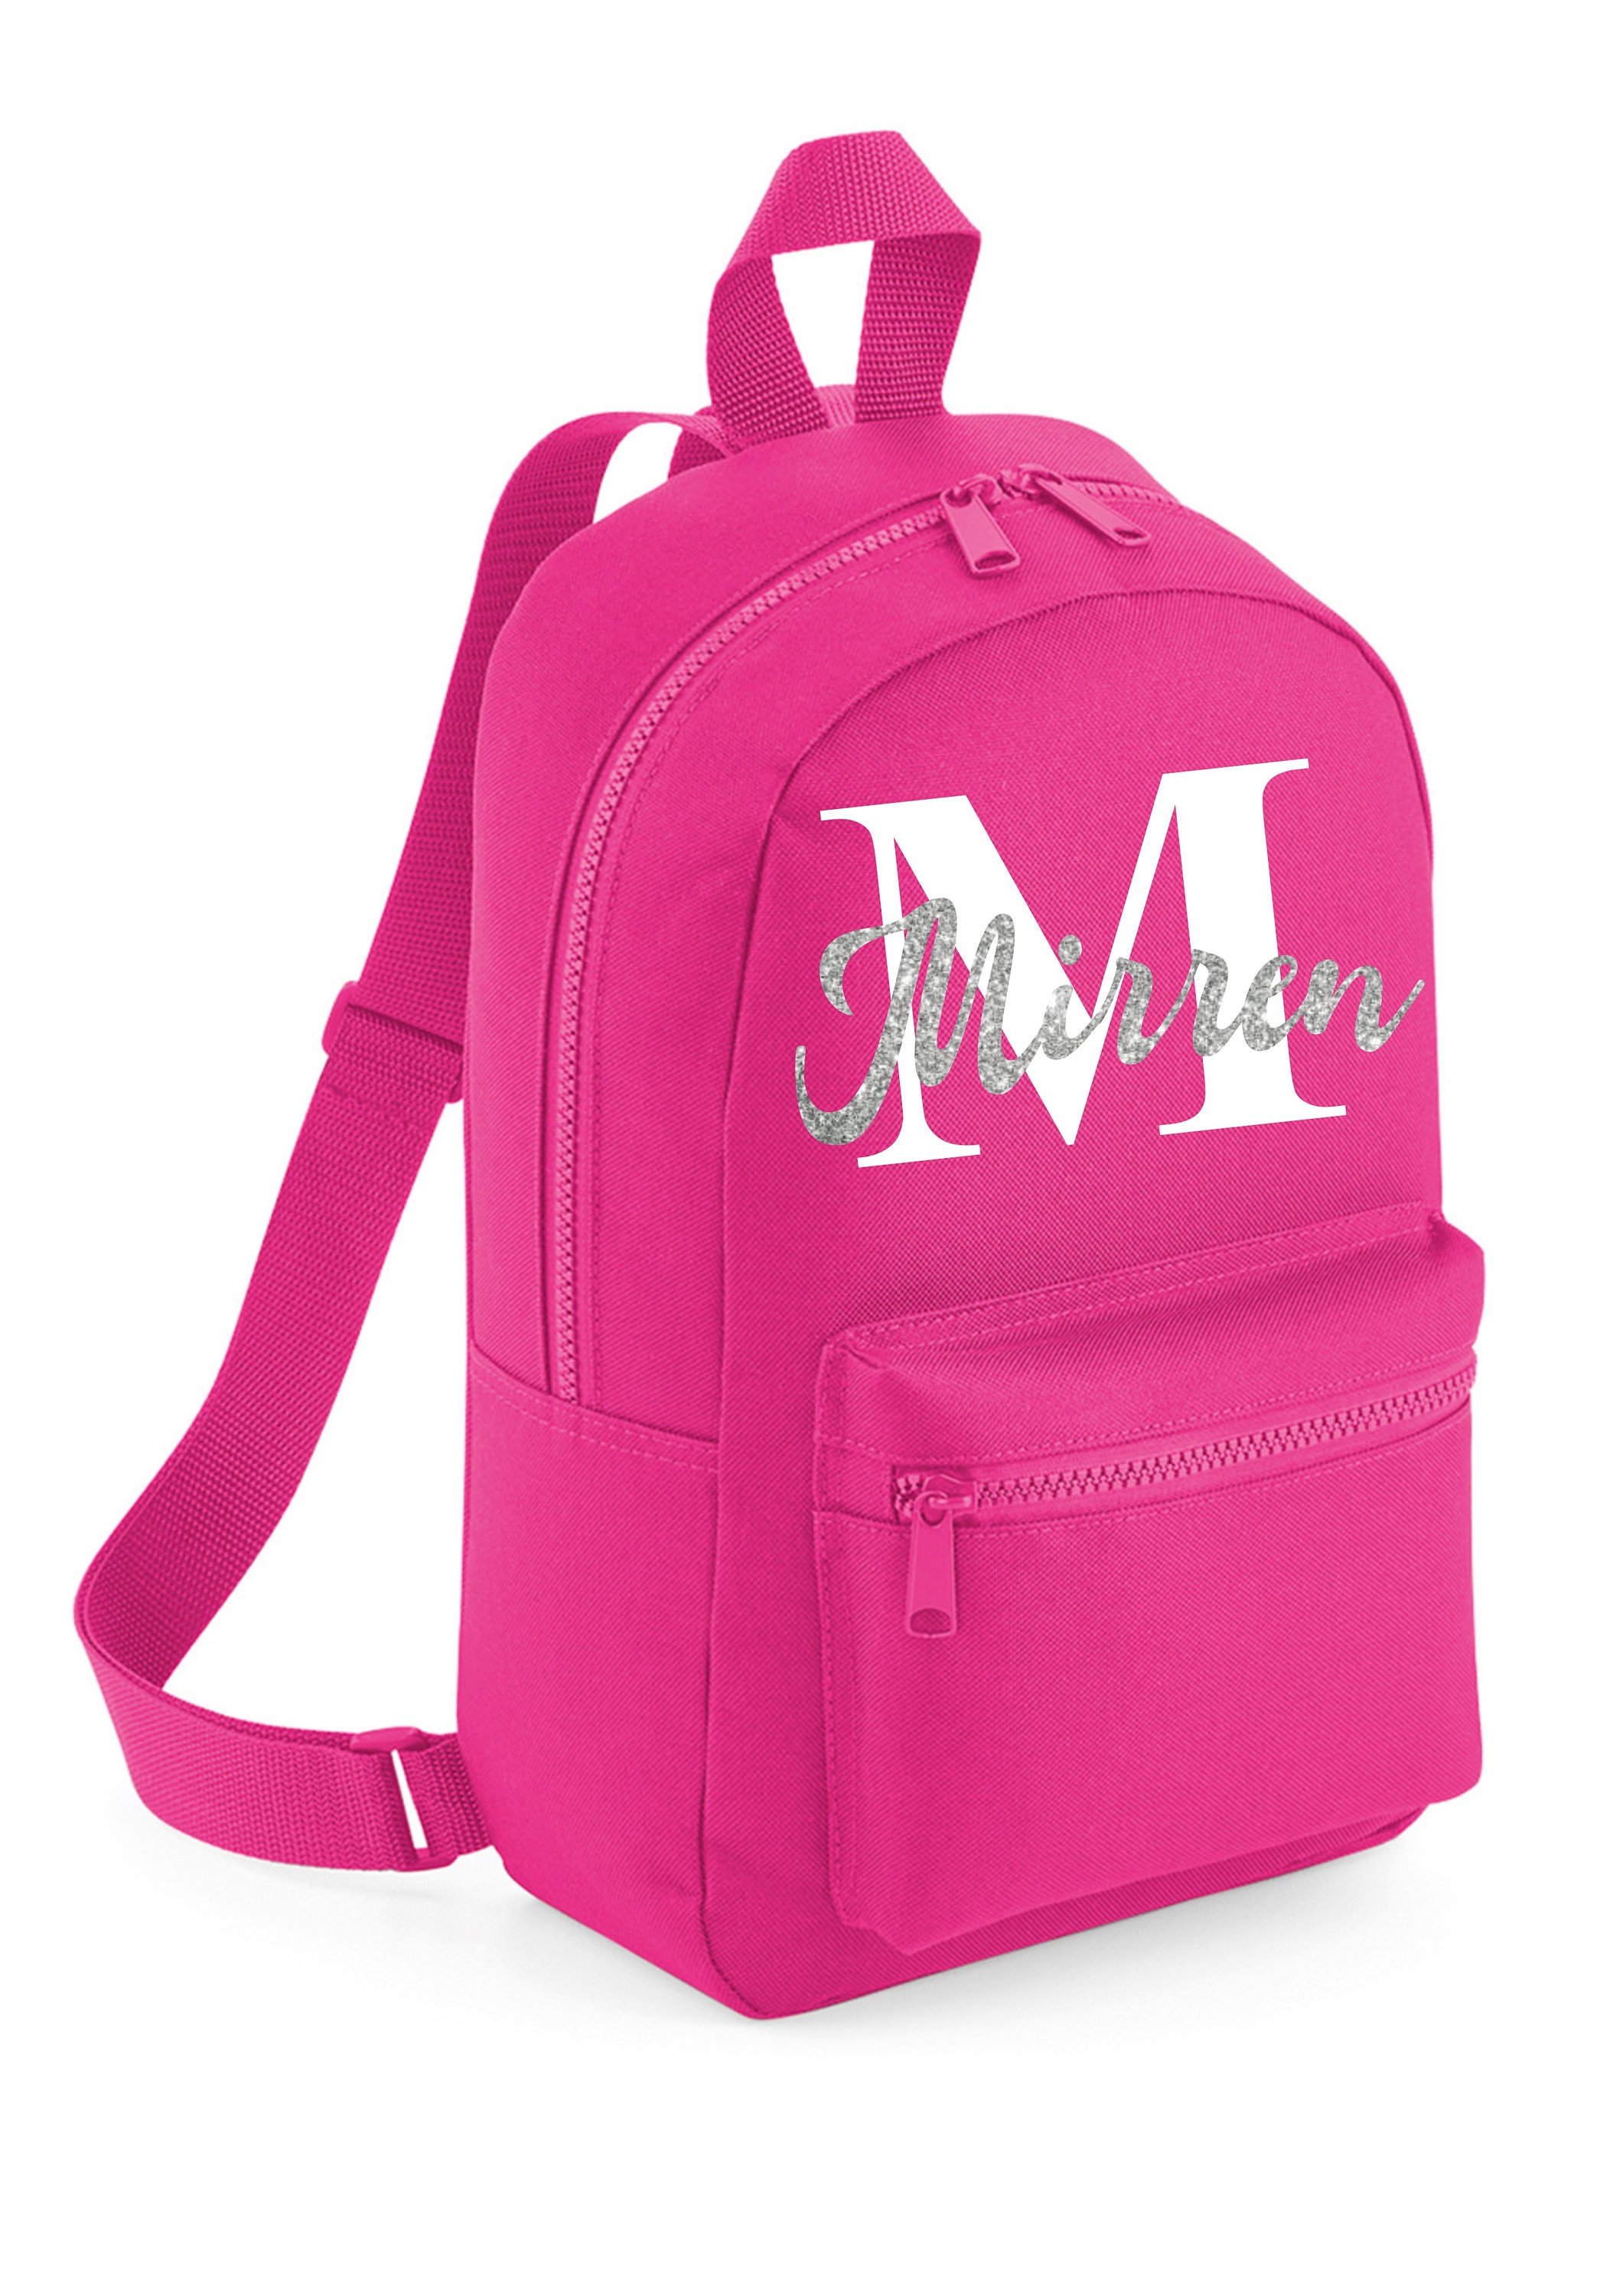 PERSONALISED: GLITTER Your Name Mini Backpack Back Pack School 